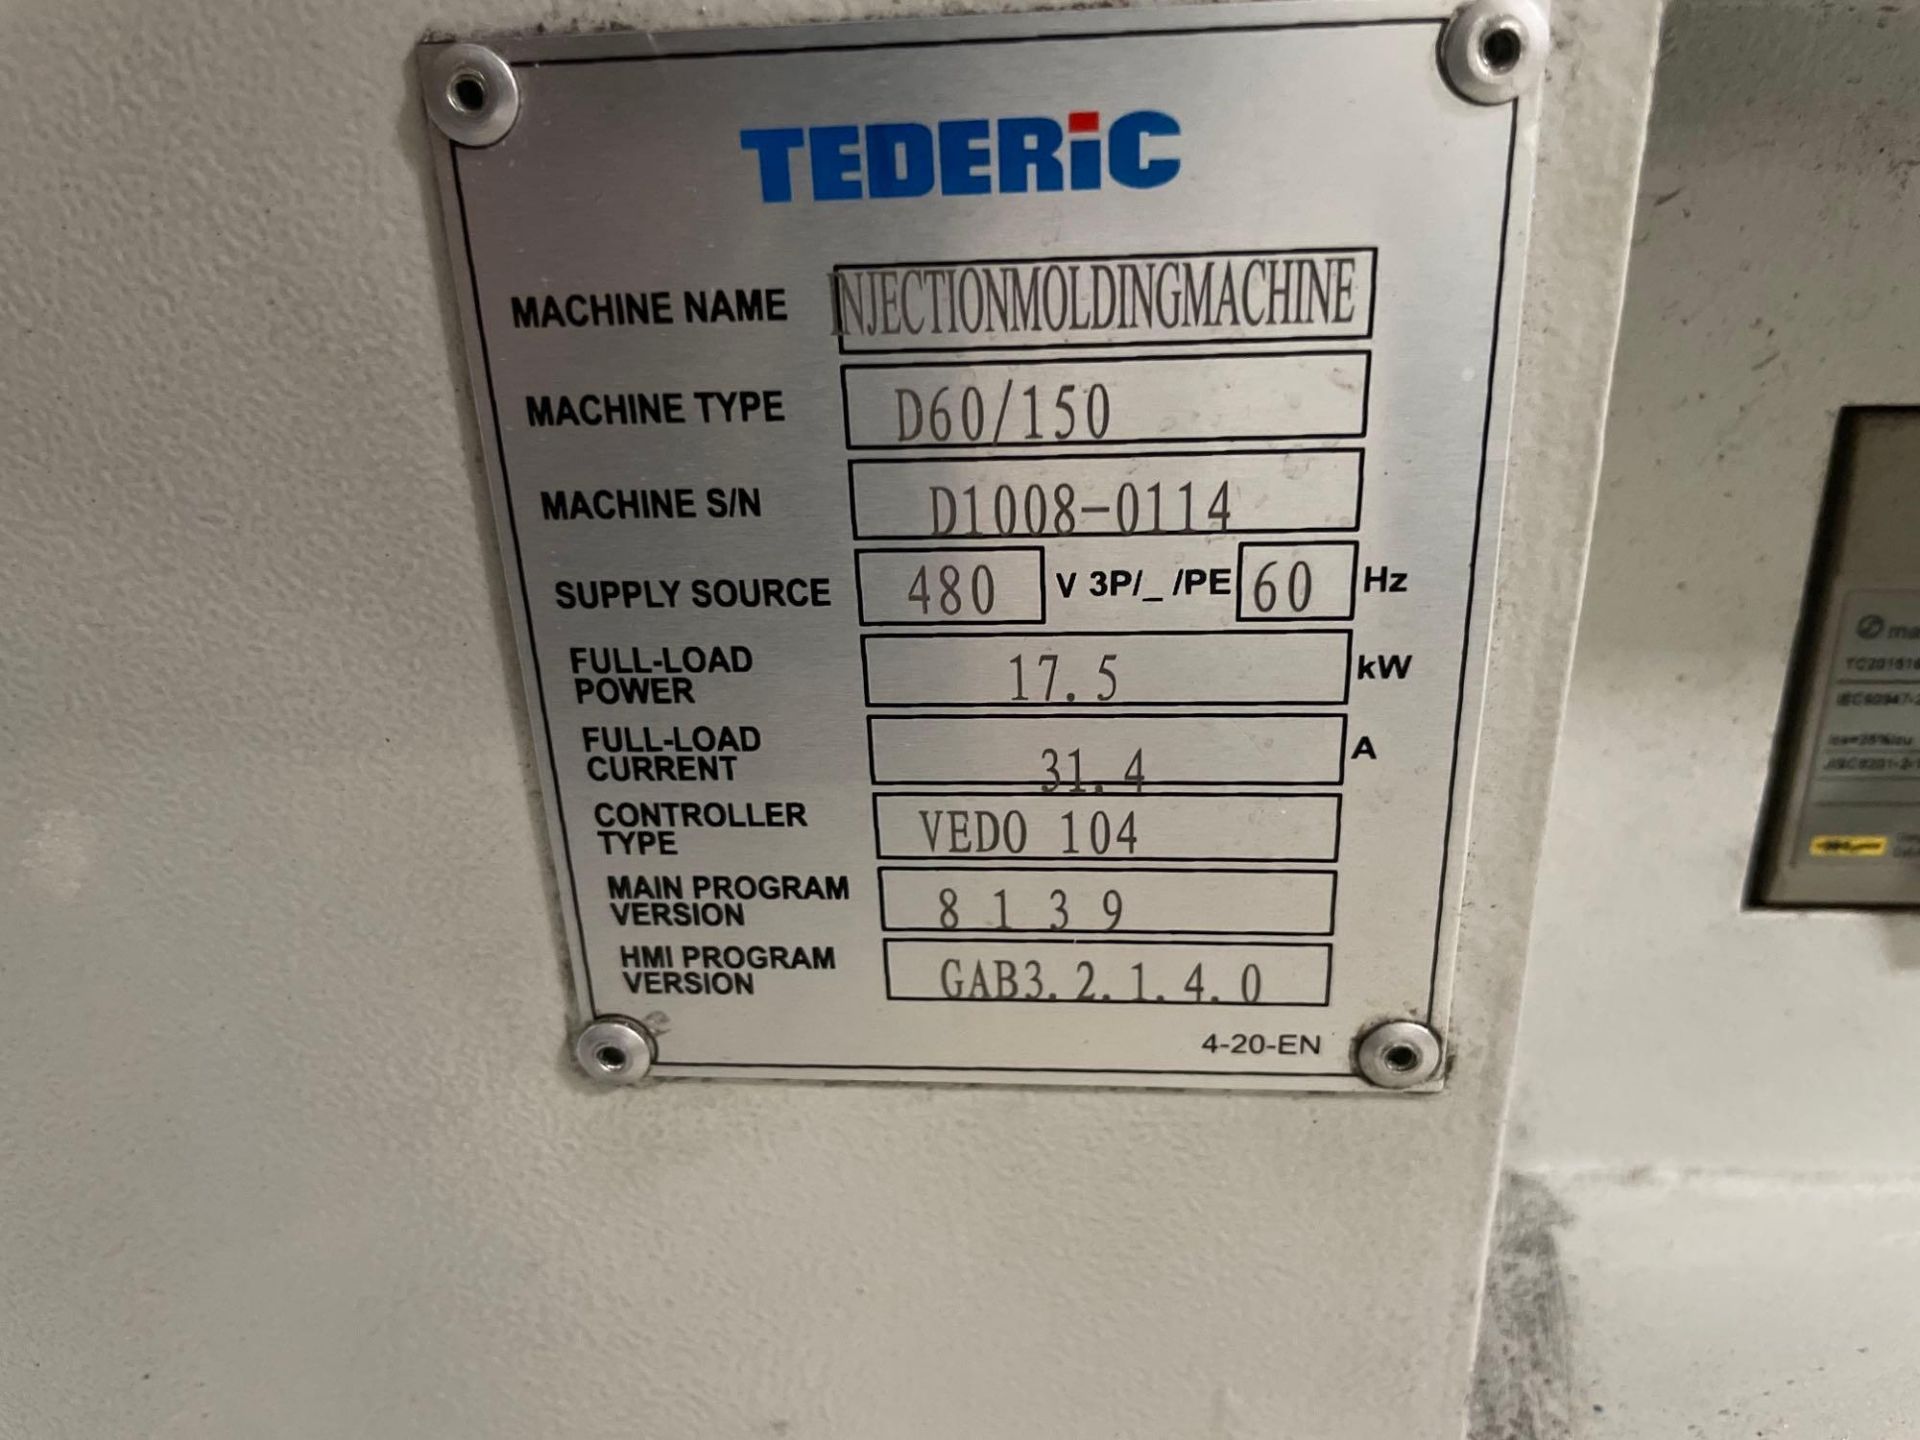 66 Ton Tederic D60/150 Plastic Injection Molder, Gefran GF Vedo 104 Control, s/n D1008-0114, New - Image 22 of 23